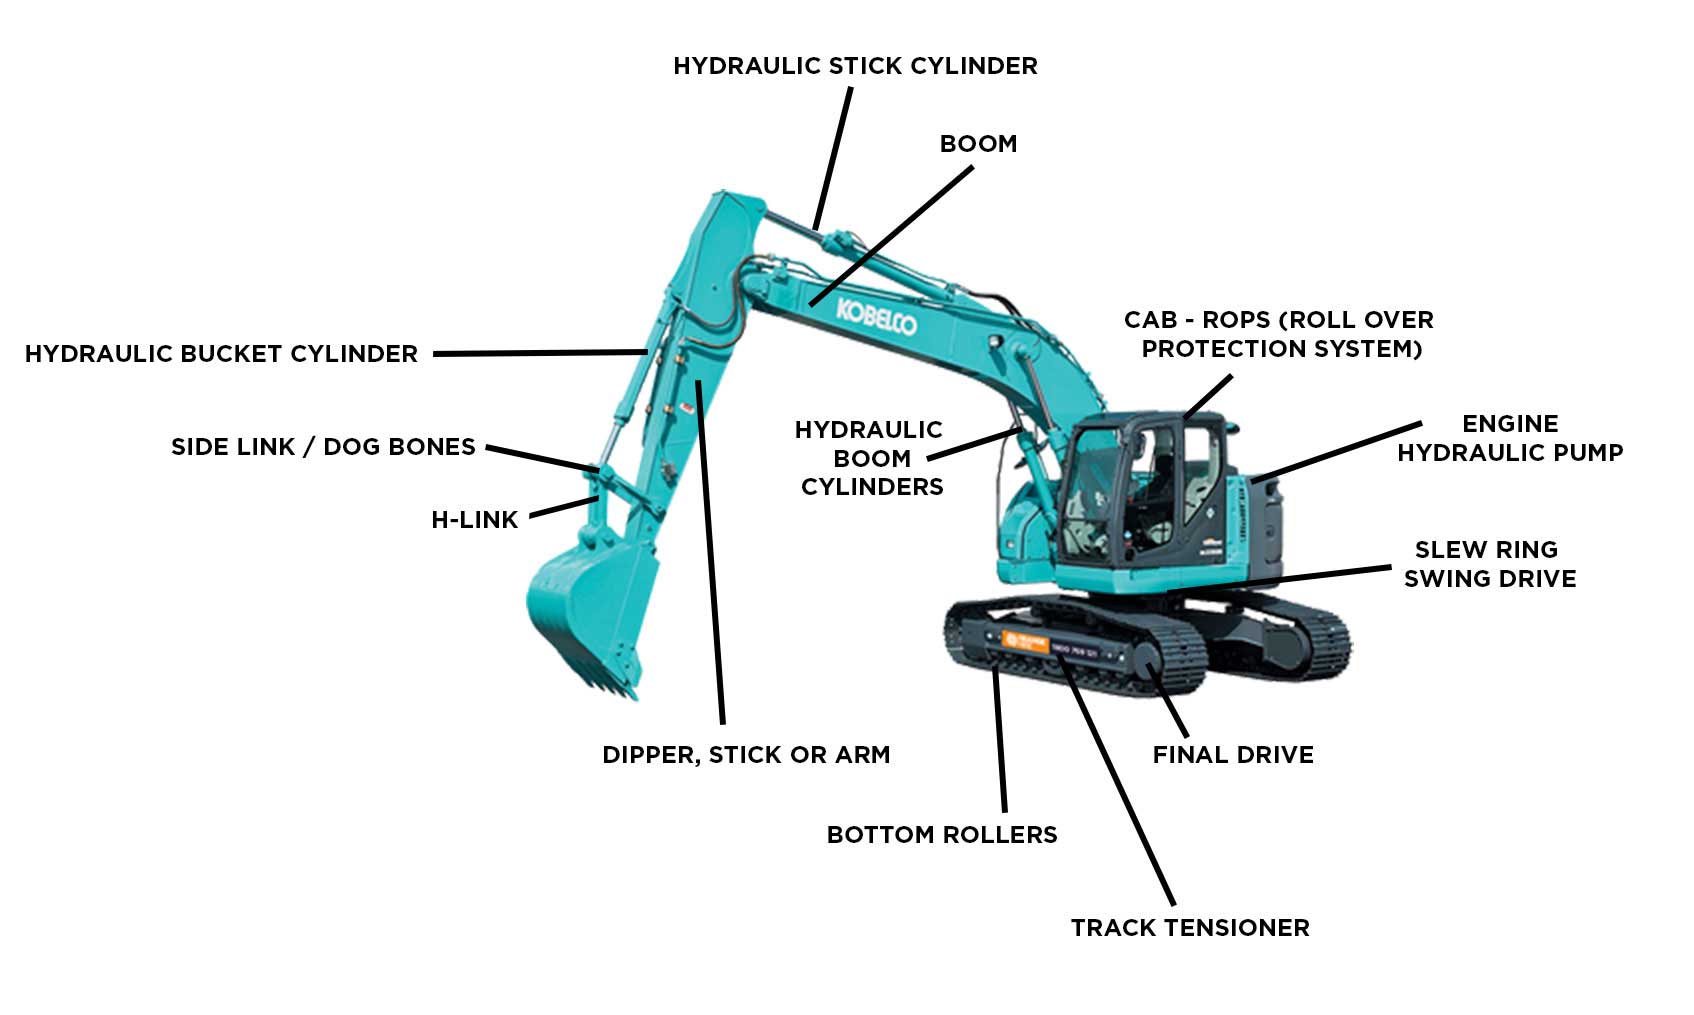 Structural composition of the excavator